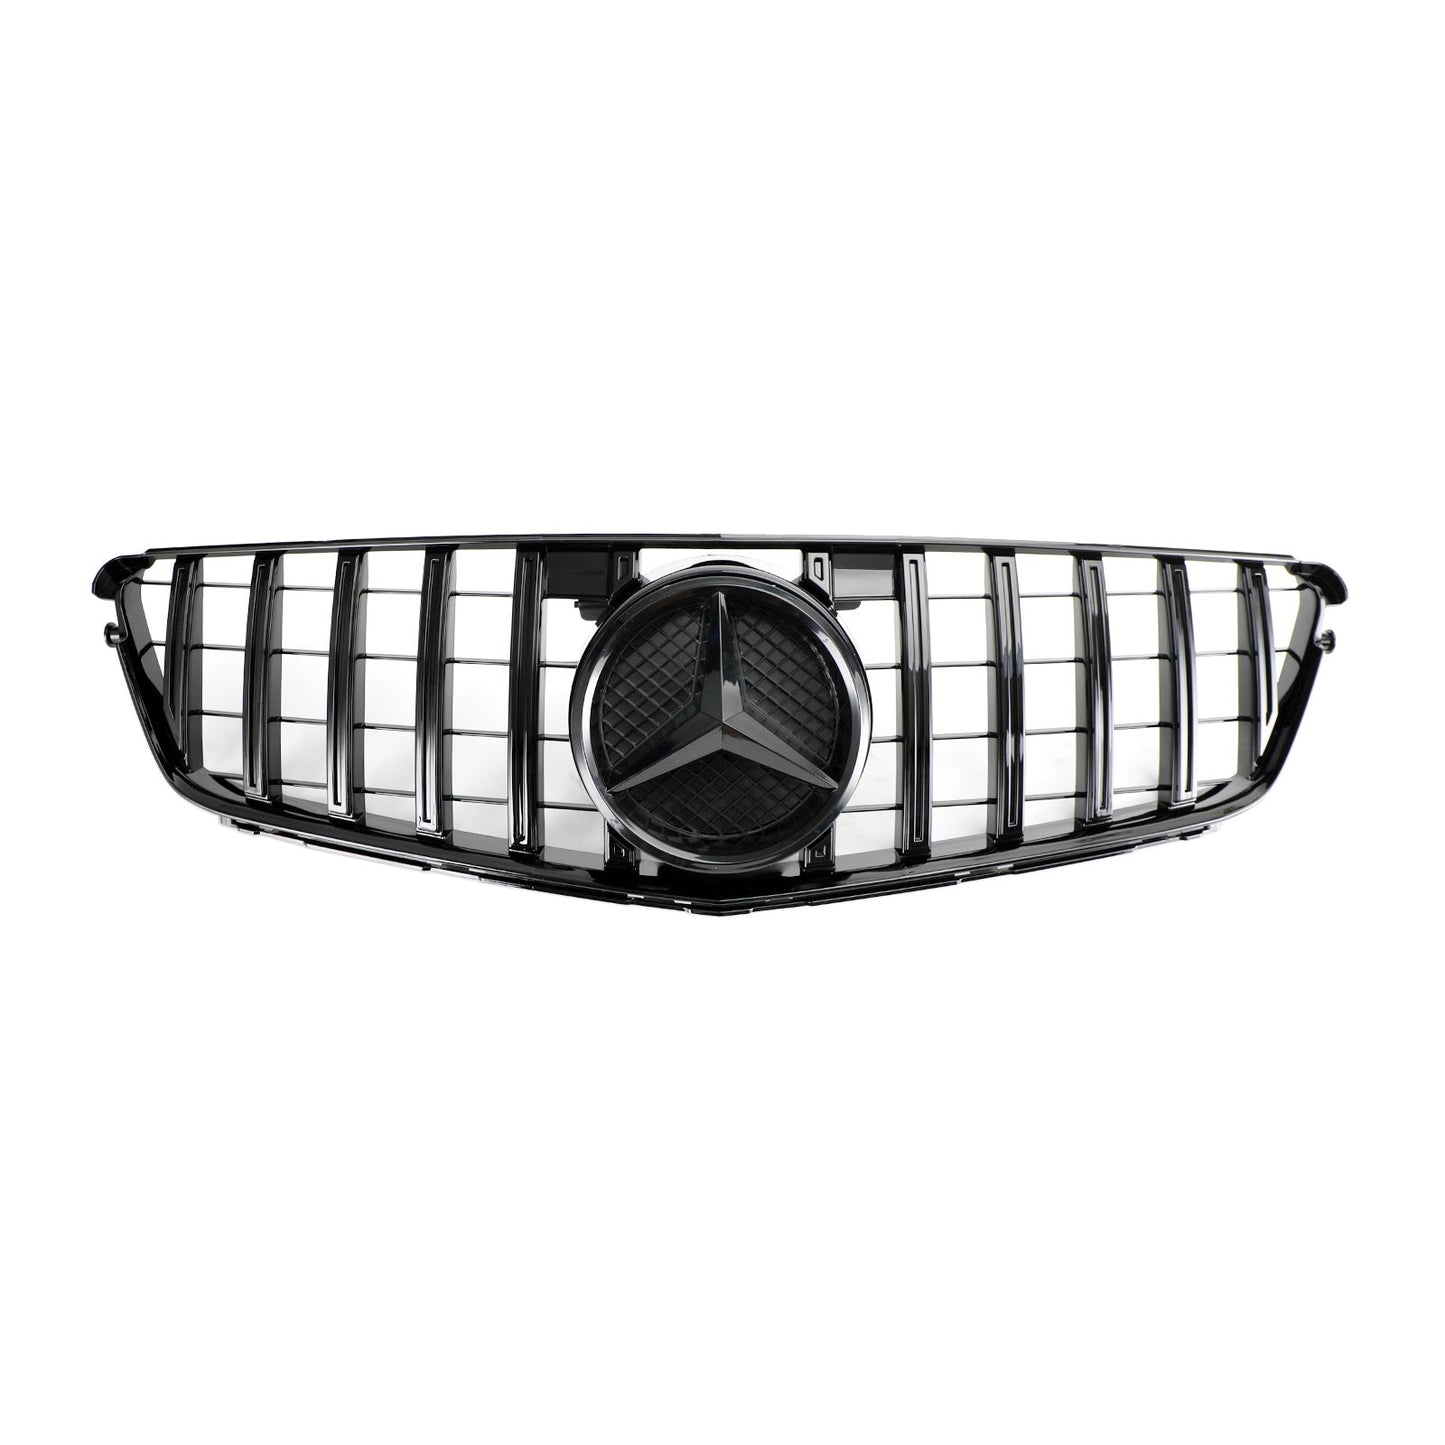 W204 C-Class 2008-2014 Benz Grill C300 C350 GTR Style Front Bumper Grille Grill